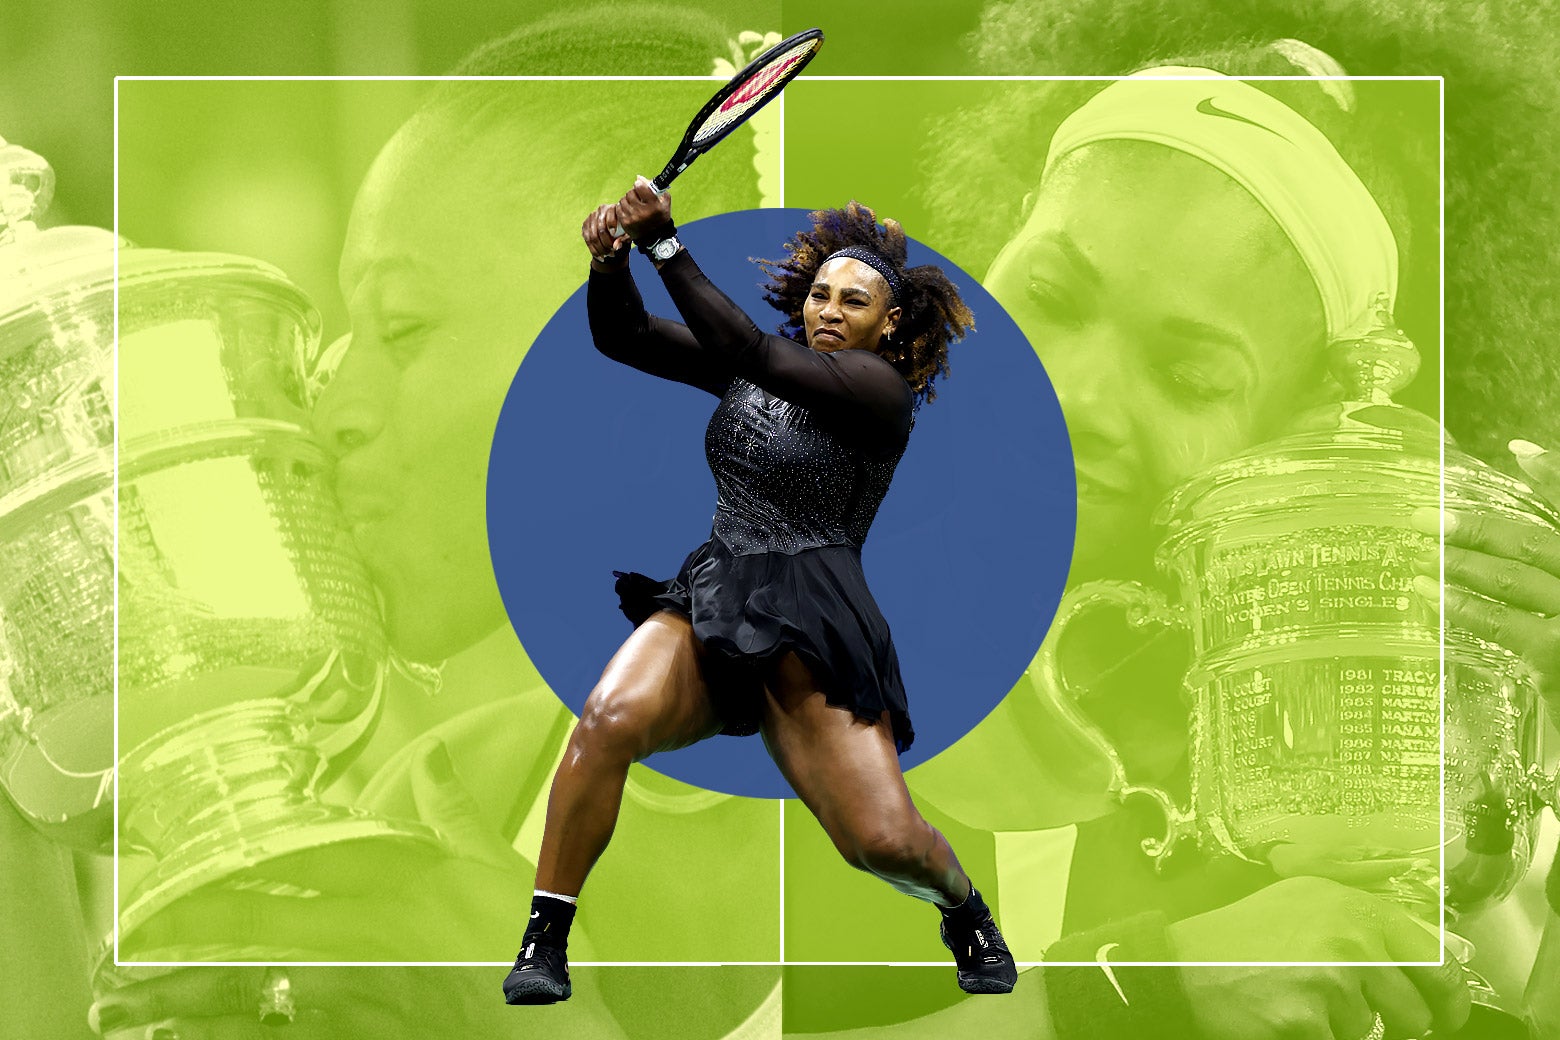 Serena hitting a backhand at the 2022 U.S. Open. In the background, photos of her kissing the trophy (left) and hugging it (right) after winning the Open in 1999 and 2012. An illustrated tennis court border and scrim frames all three photos.